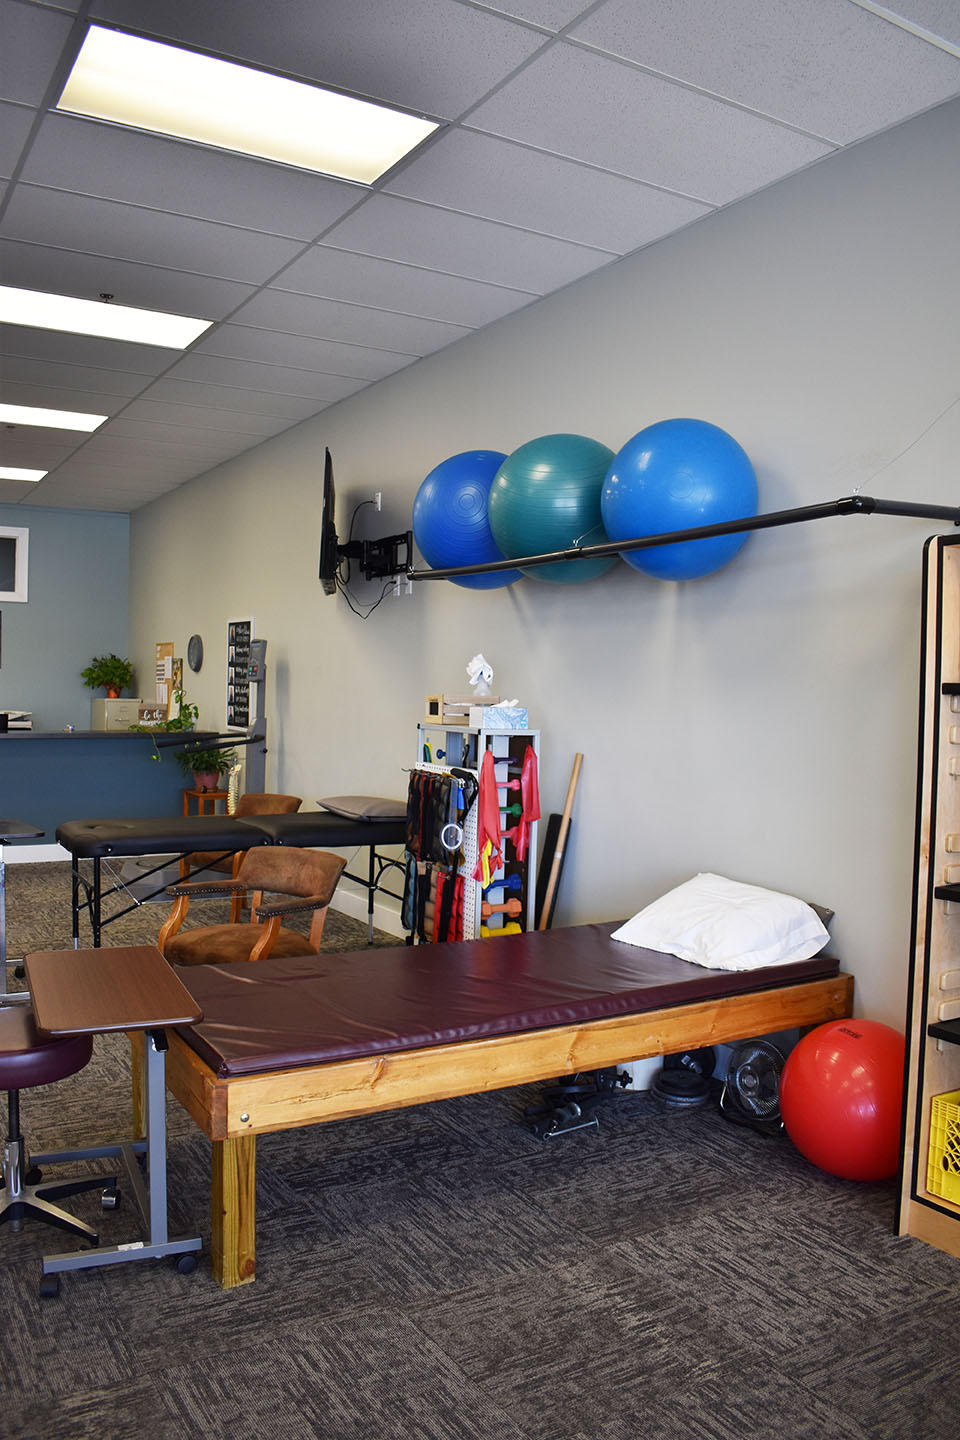 Kinetic Edge Physical Therapy 1011 N 18th St, Centerville Iowa 52544